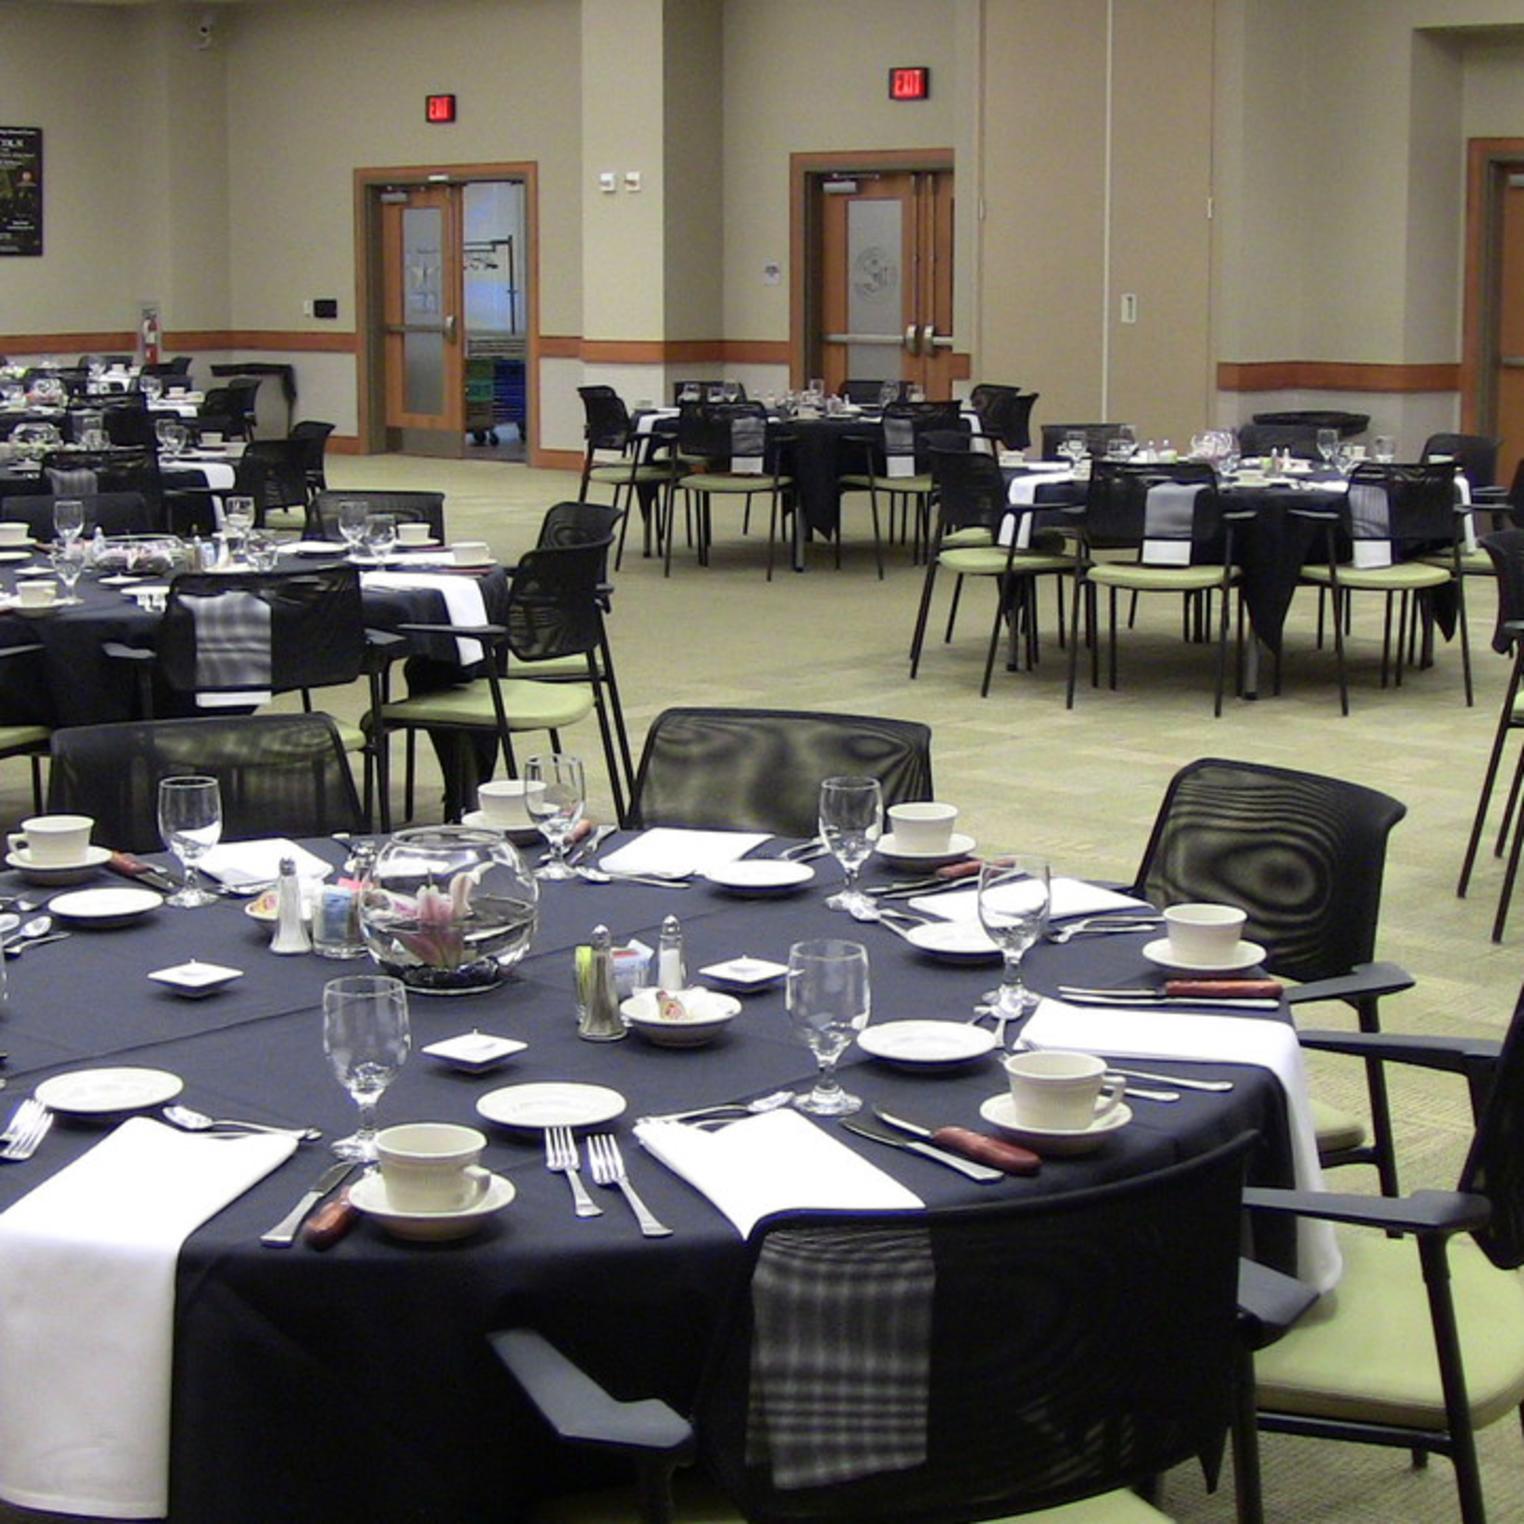 U.S. Army Heritage & Education Center Banquet Space